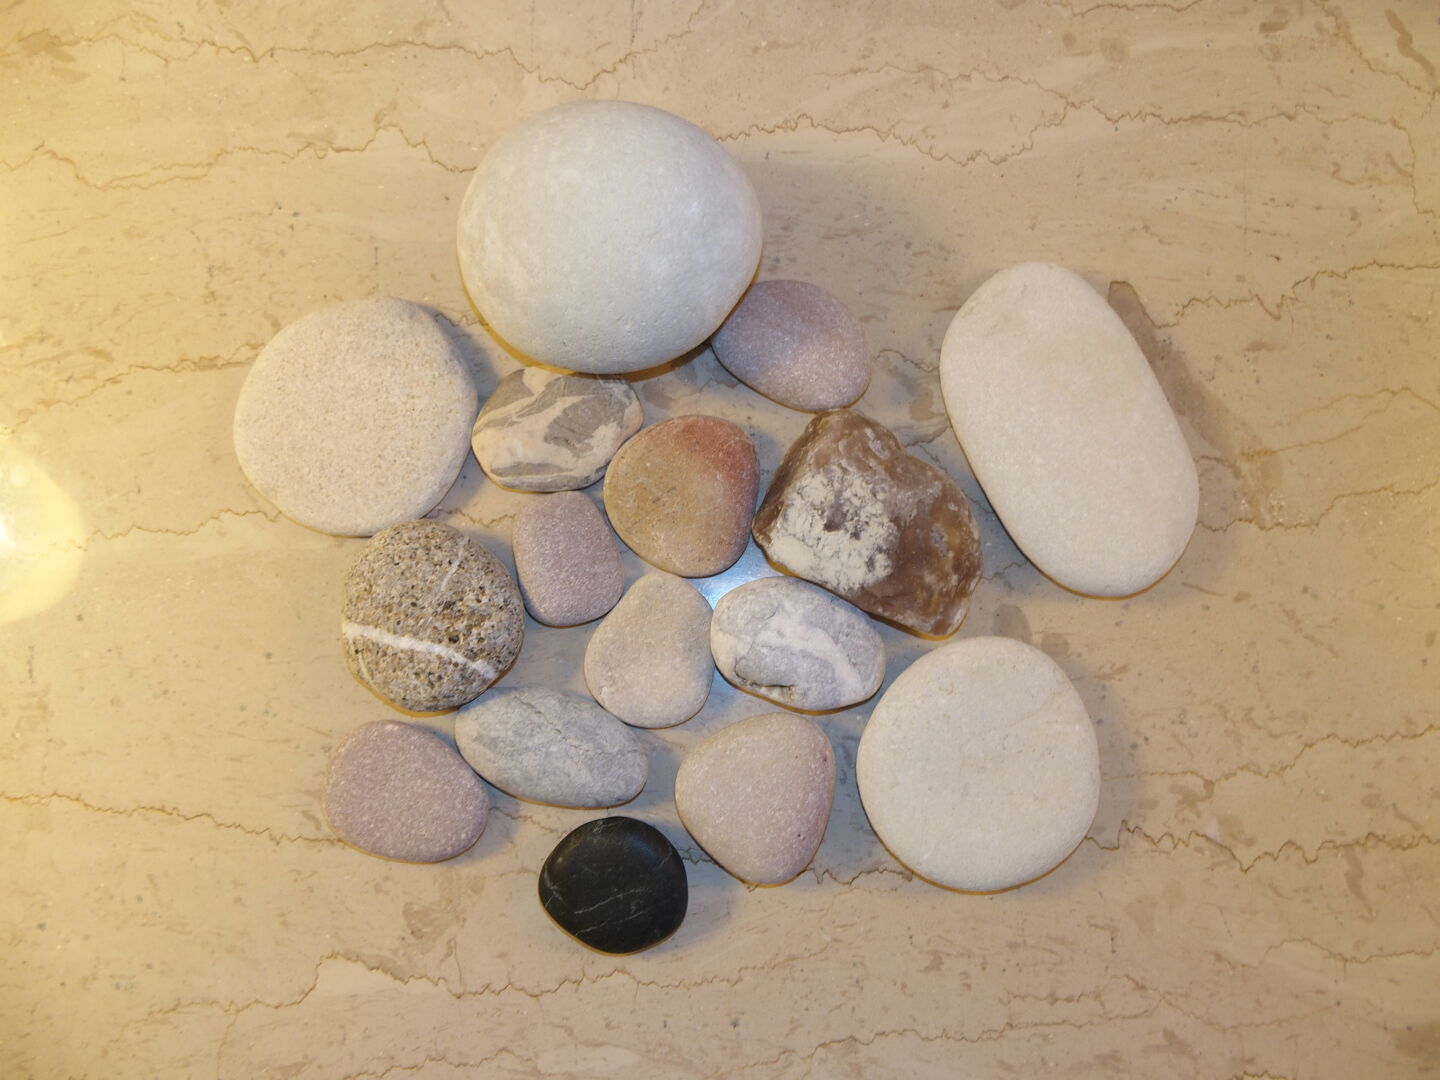 ... I brought home only a few, to guarantee this year&rsquo;s production of worry stones (German: Handschmeichler).